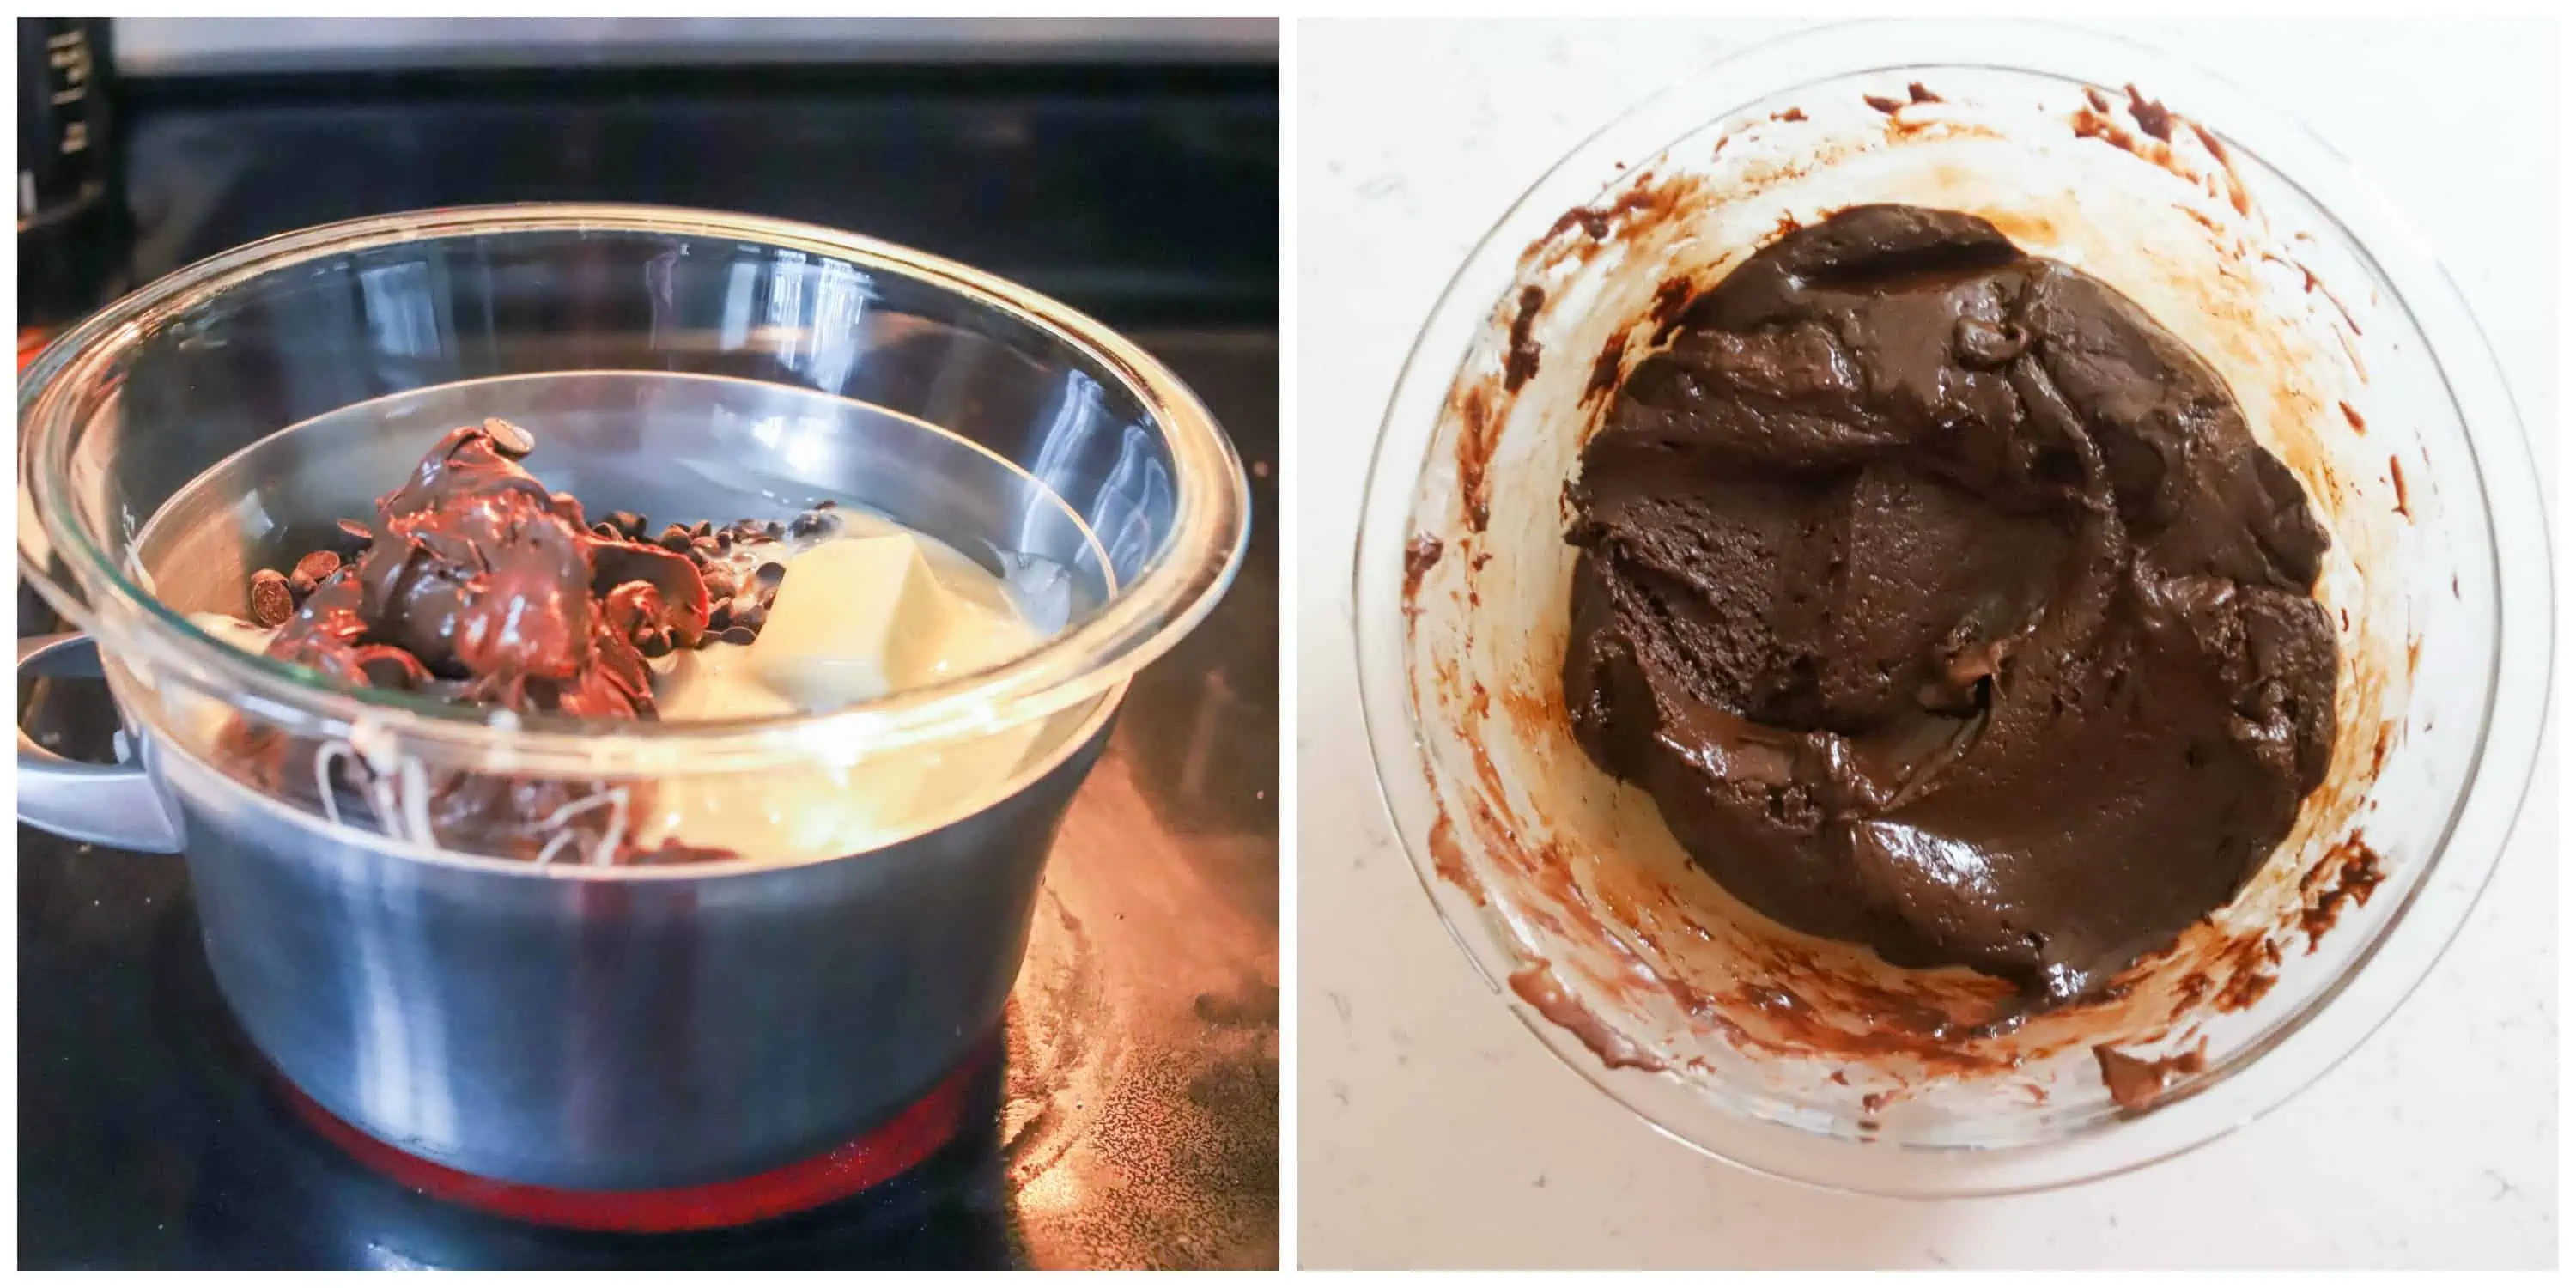 two photos of fudge mixture in bowl over double boiler and fudge mixture melted together